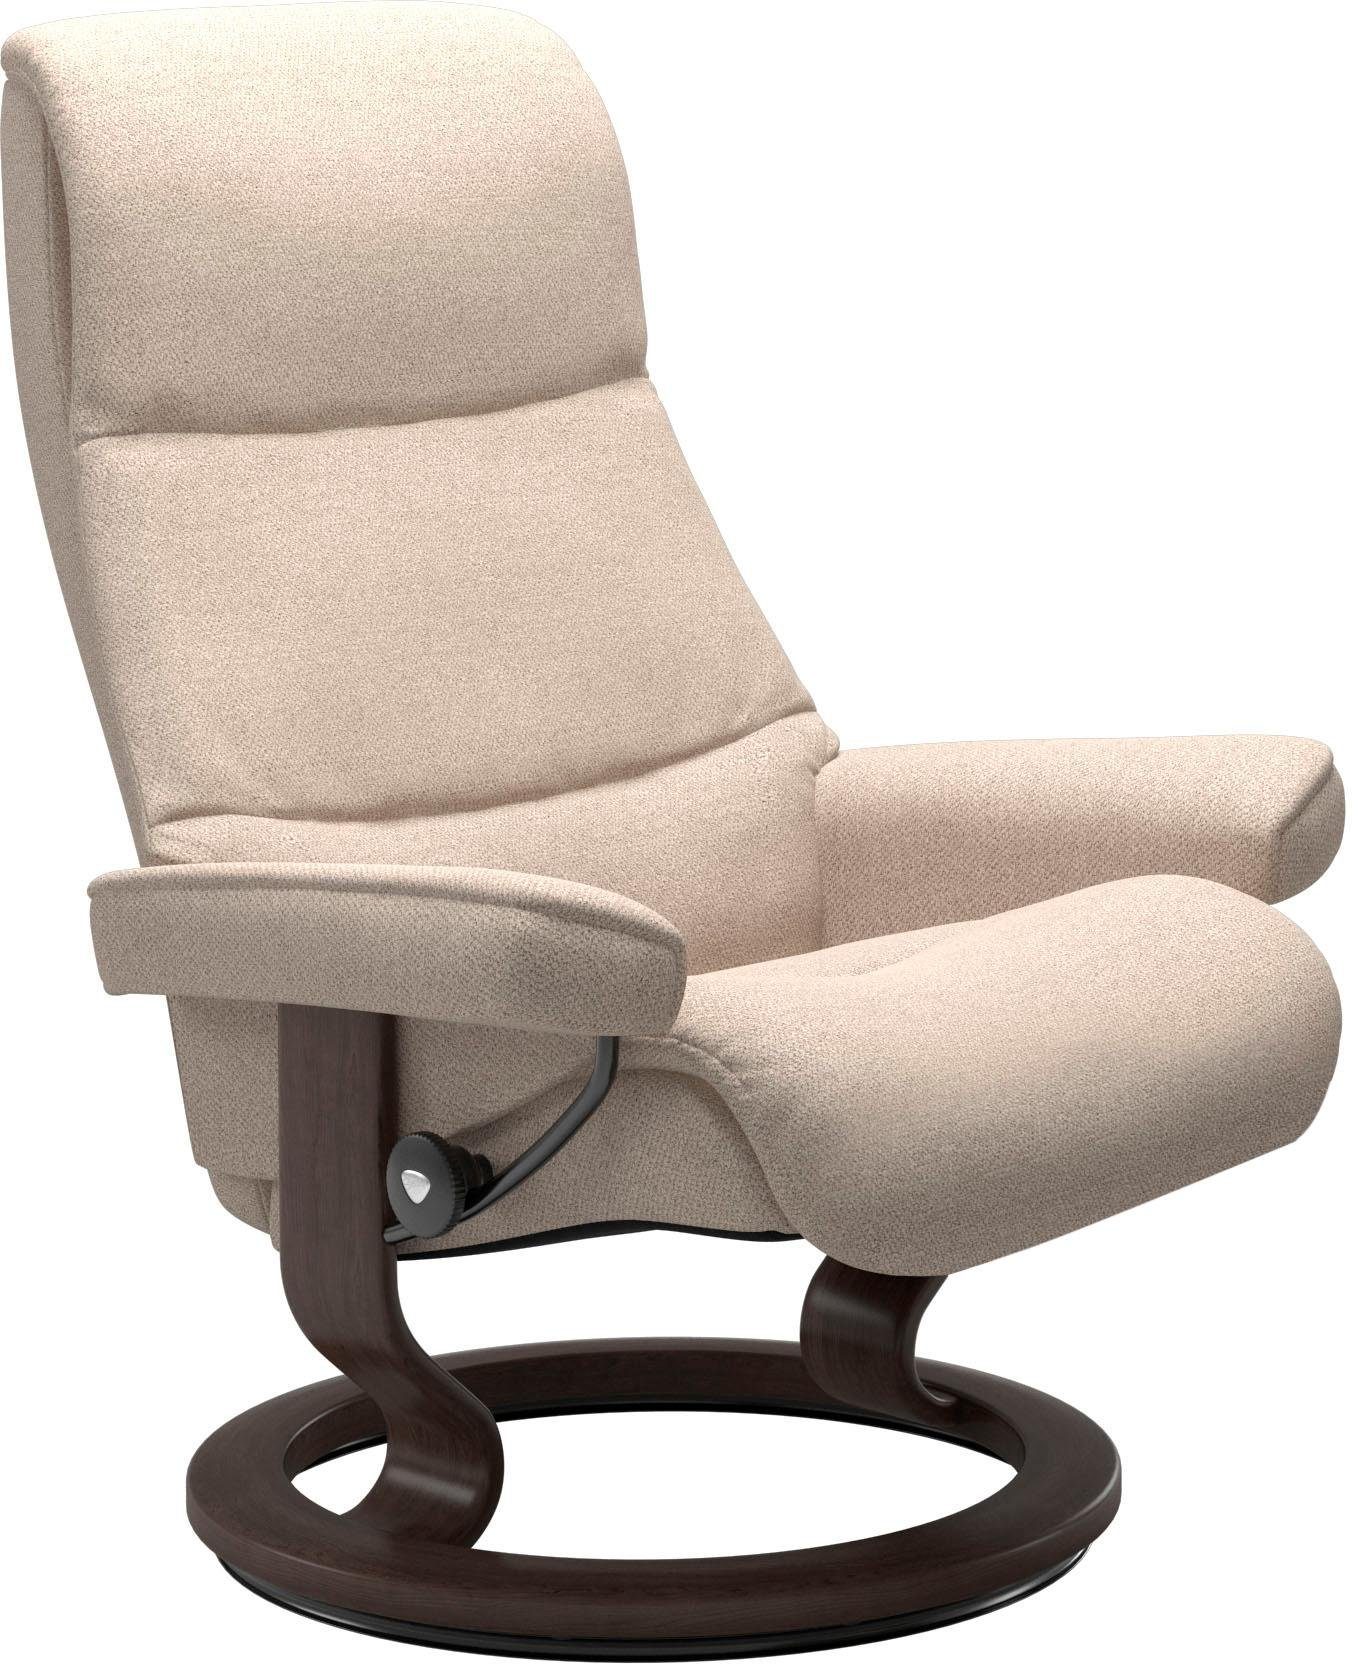 M,Gestell Stressless® Relaxsessel Größe Wenge mit Base, Classic View,